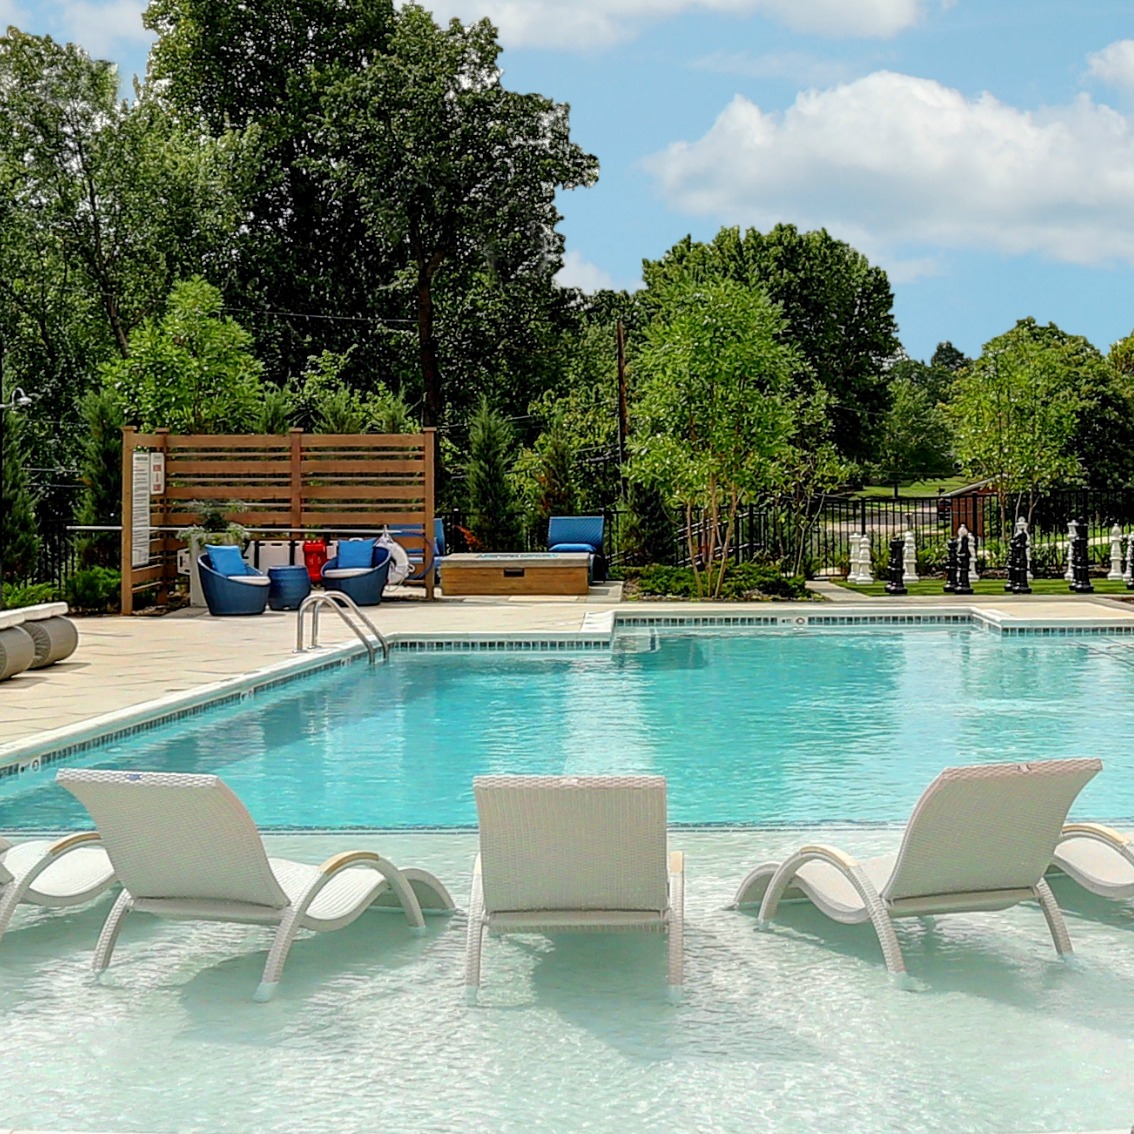 The Henry at Fritz Farm luxury apartments resort-style pool